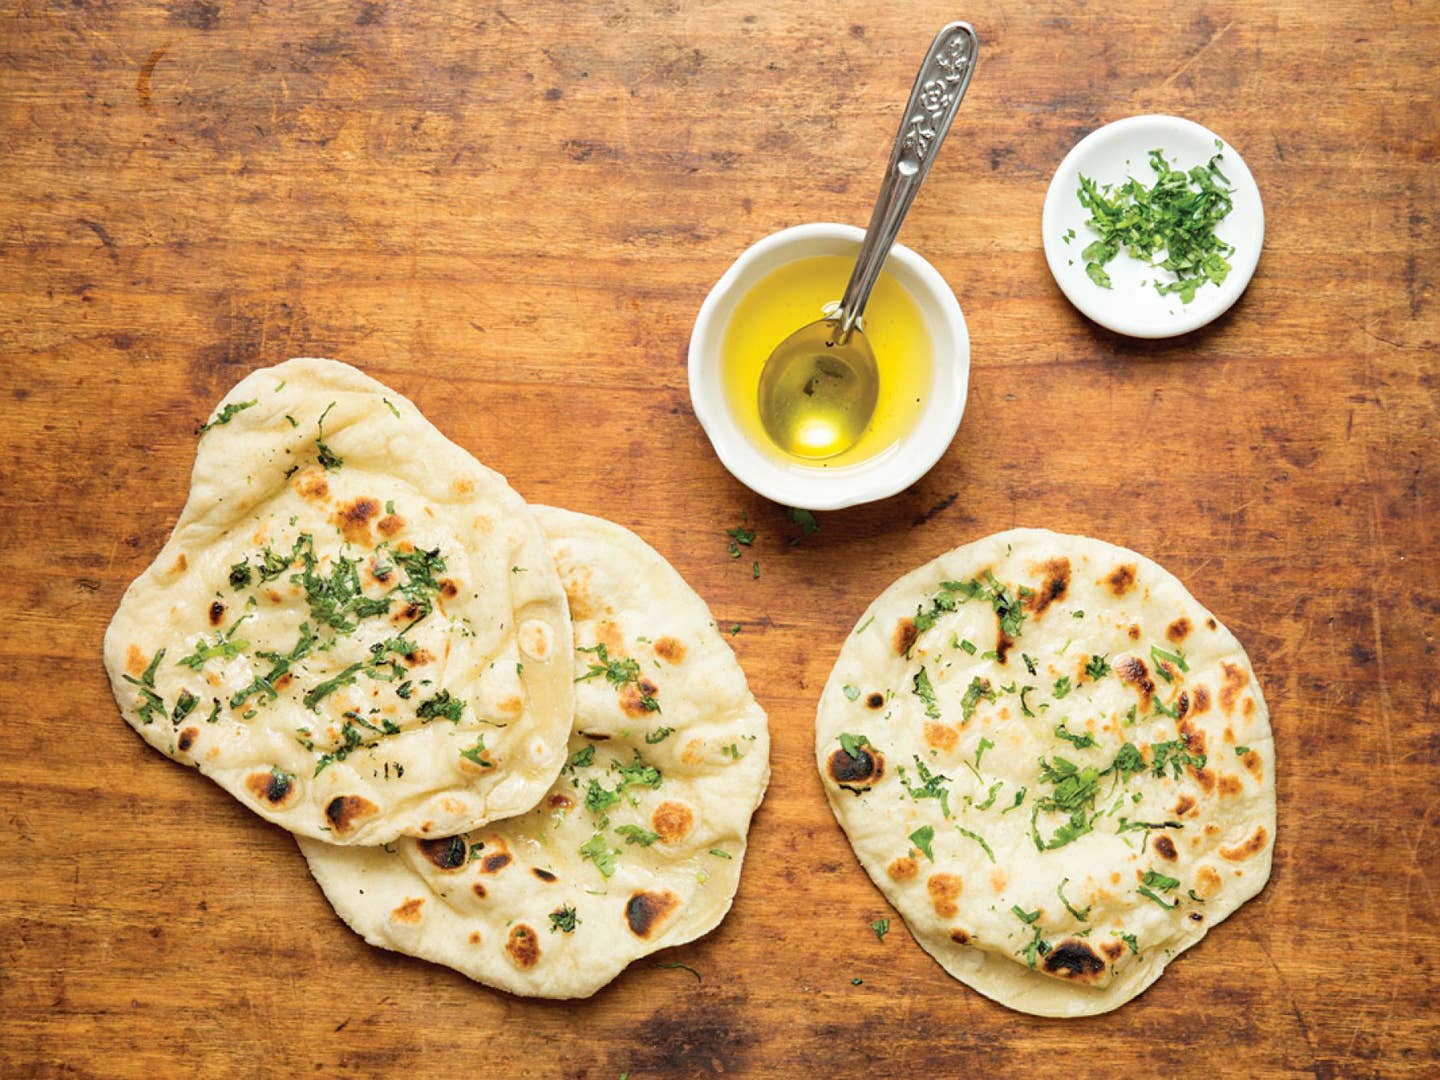 16 Flatbread Recipes to Satisfy Your Carb Cravings